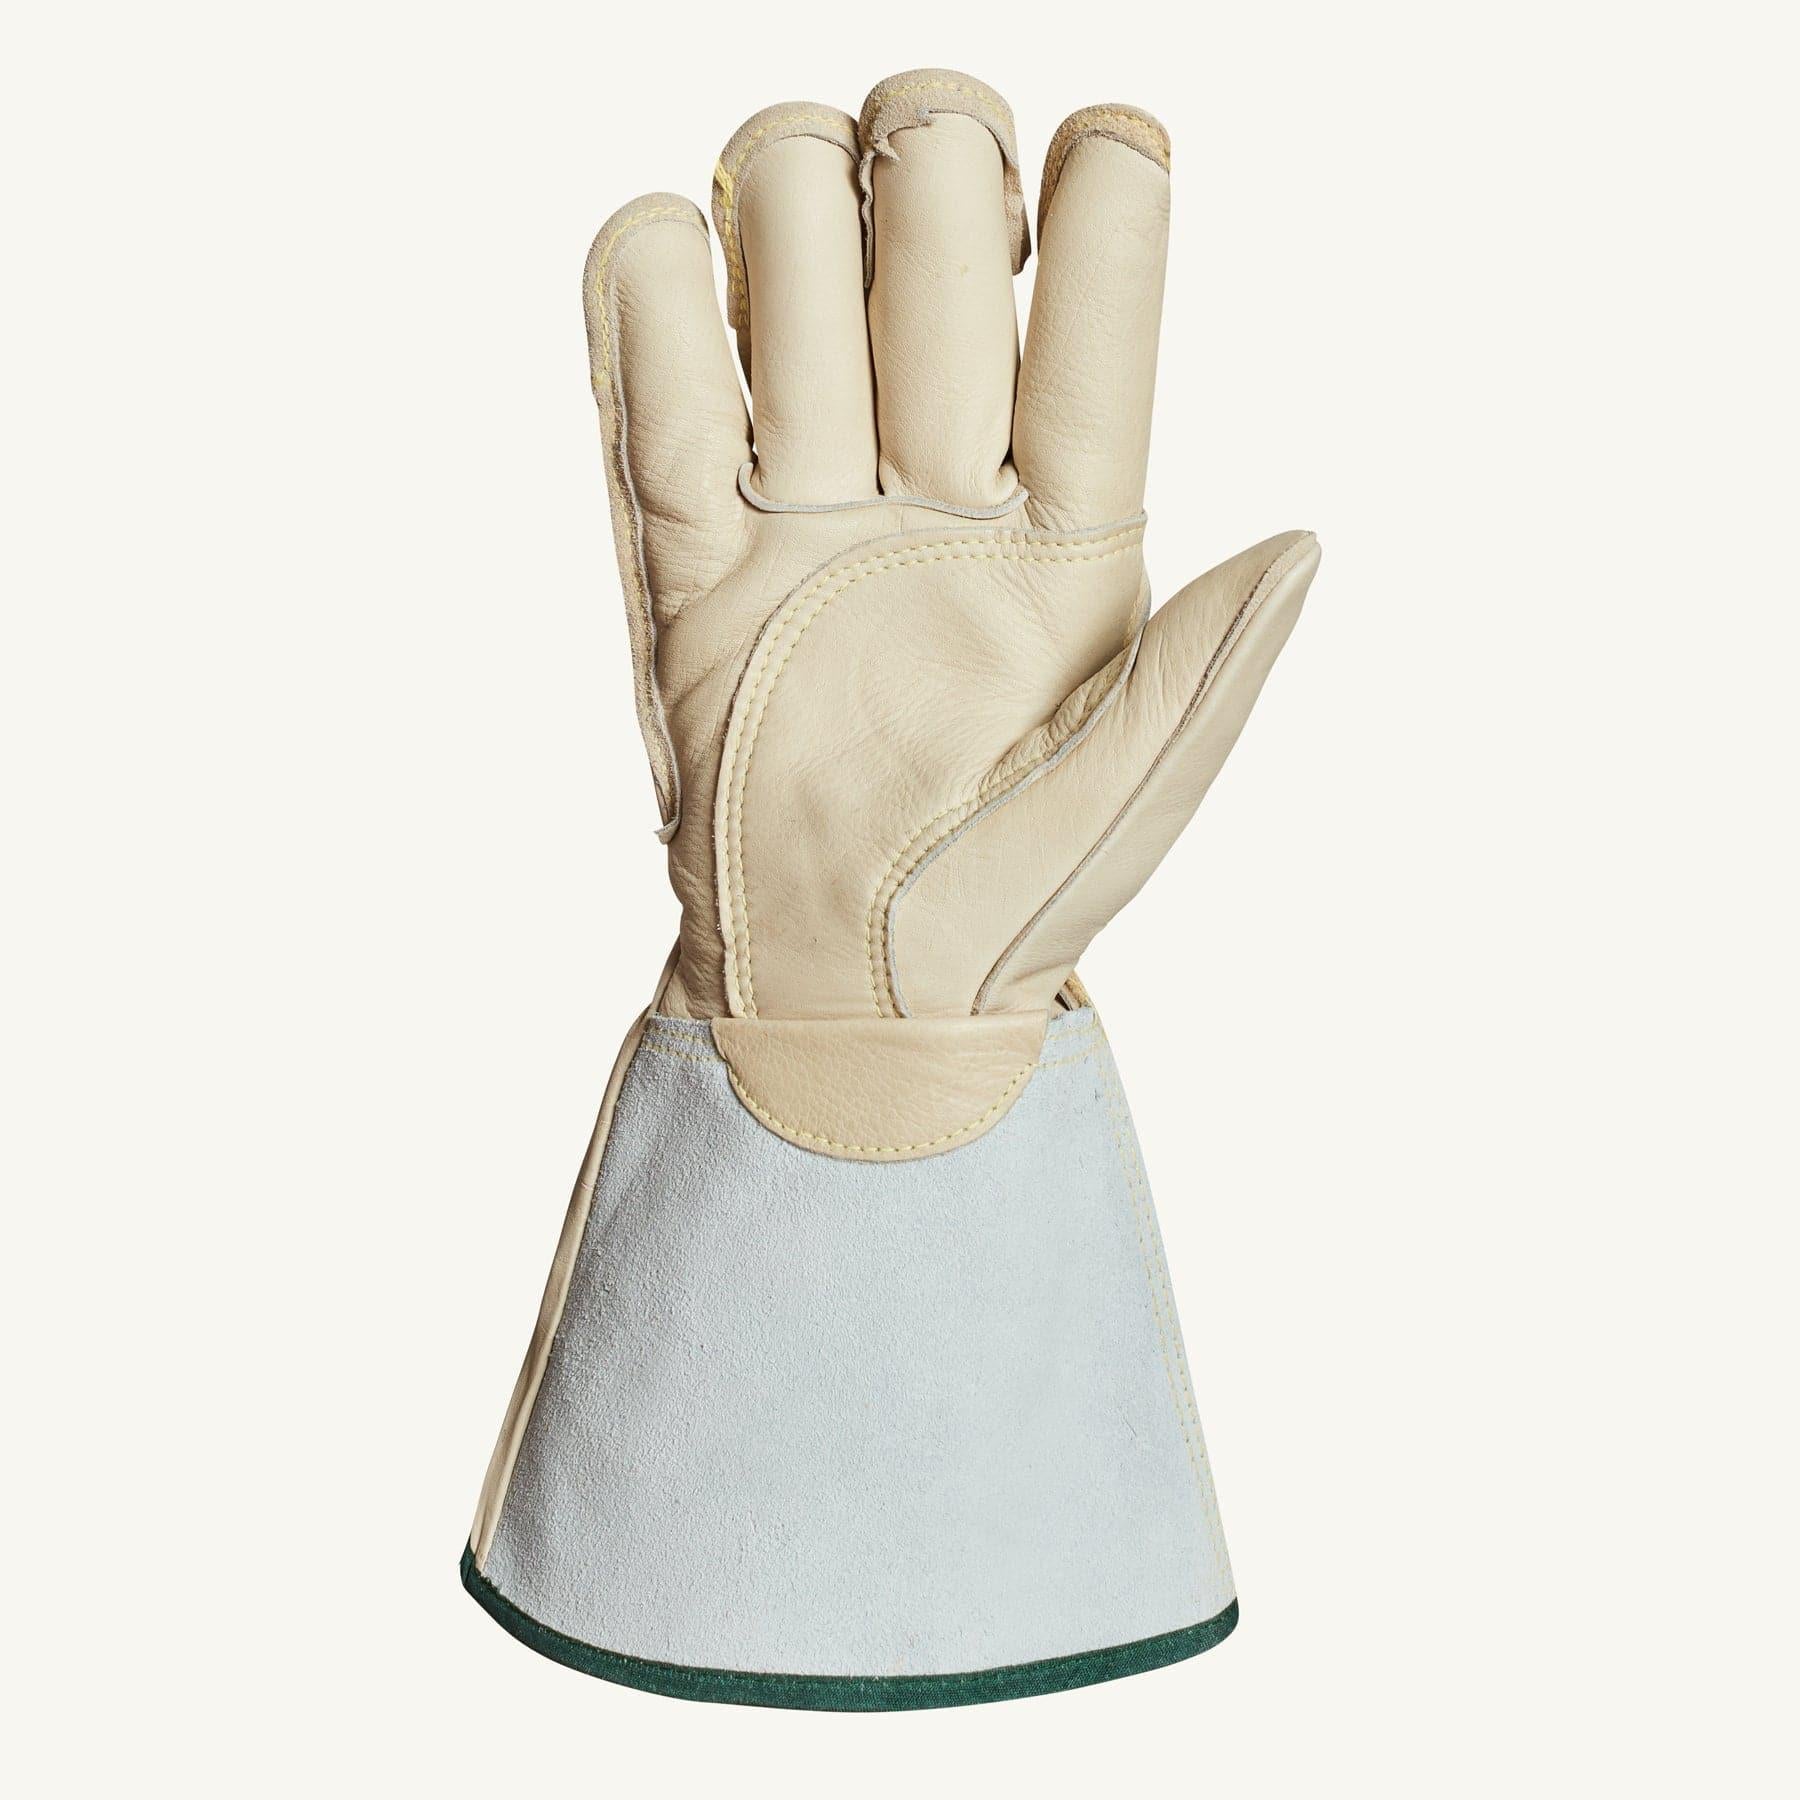 Deluxe lined fitting gloves (Pair)